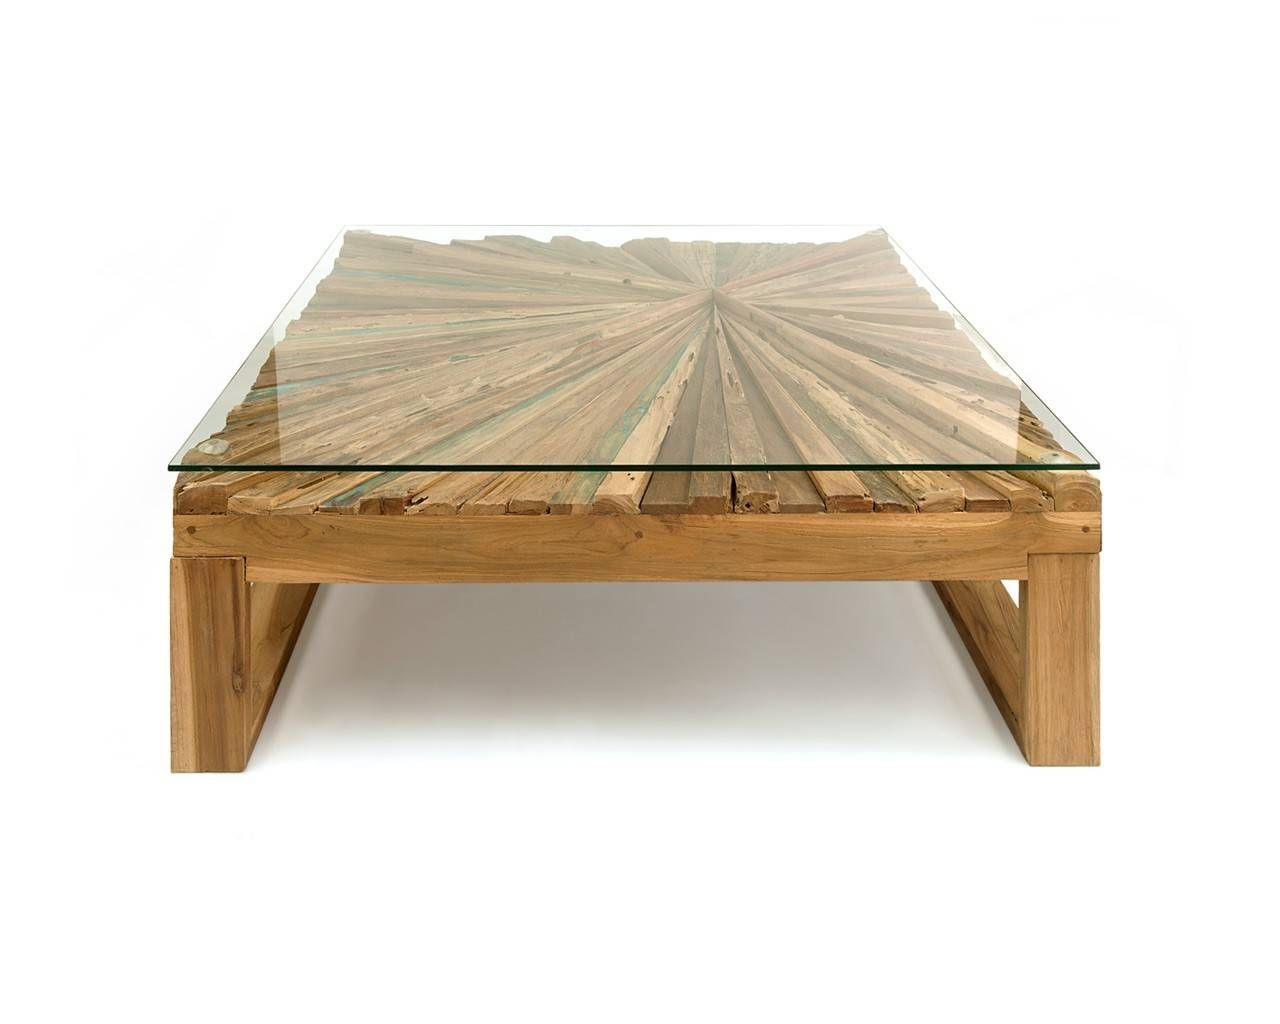 Unique Modern Modern Unique Glass Coffee Table Ideas For Simple Regarding Simple Glass Coffee Tables (View 17 of 30)